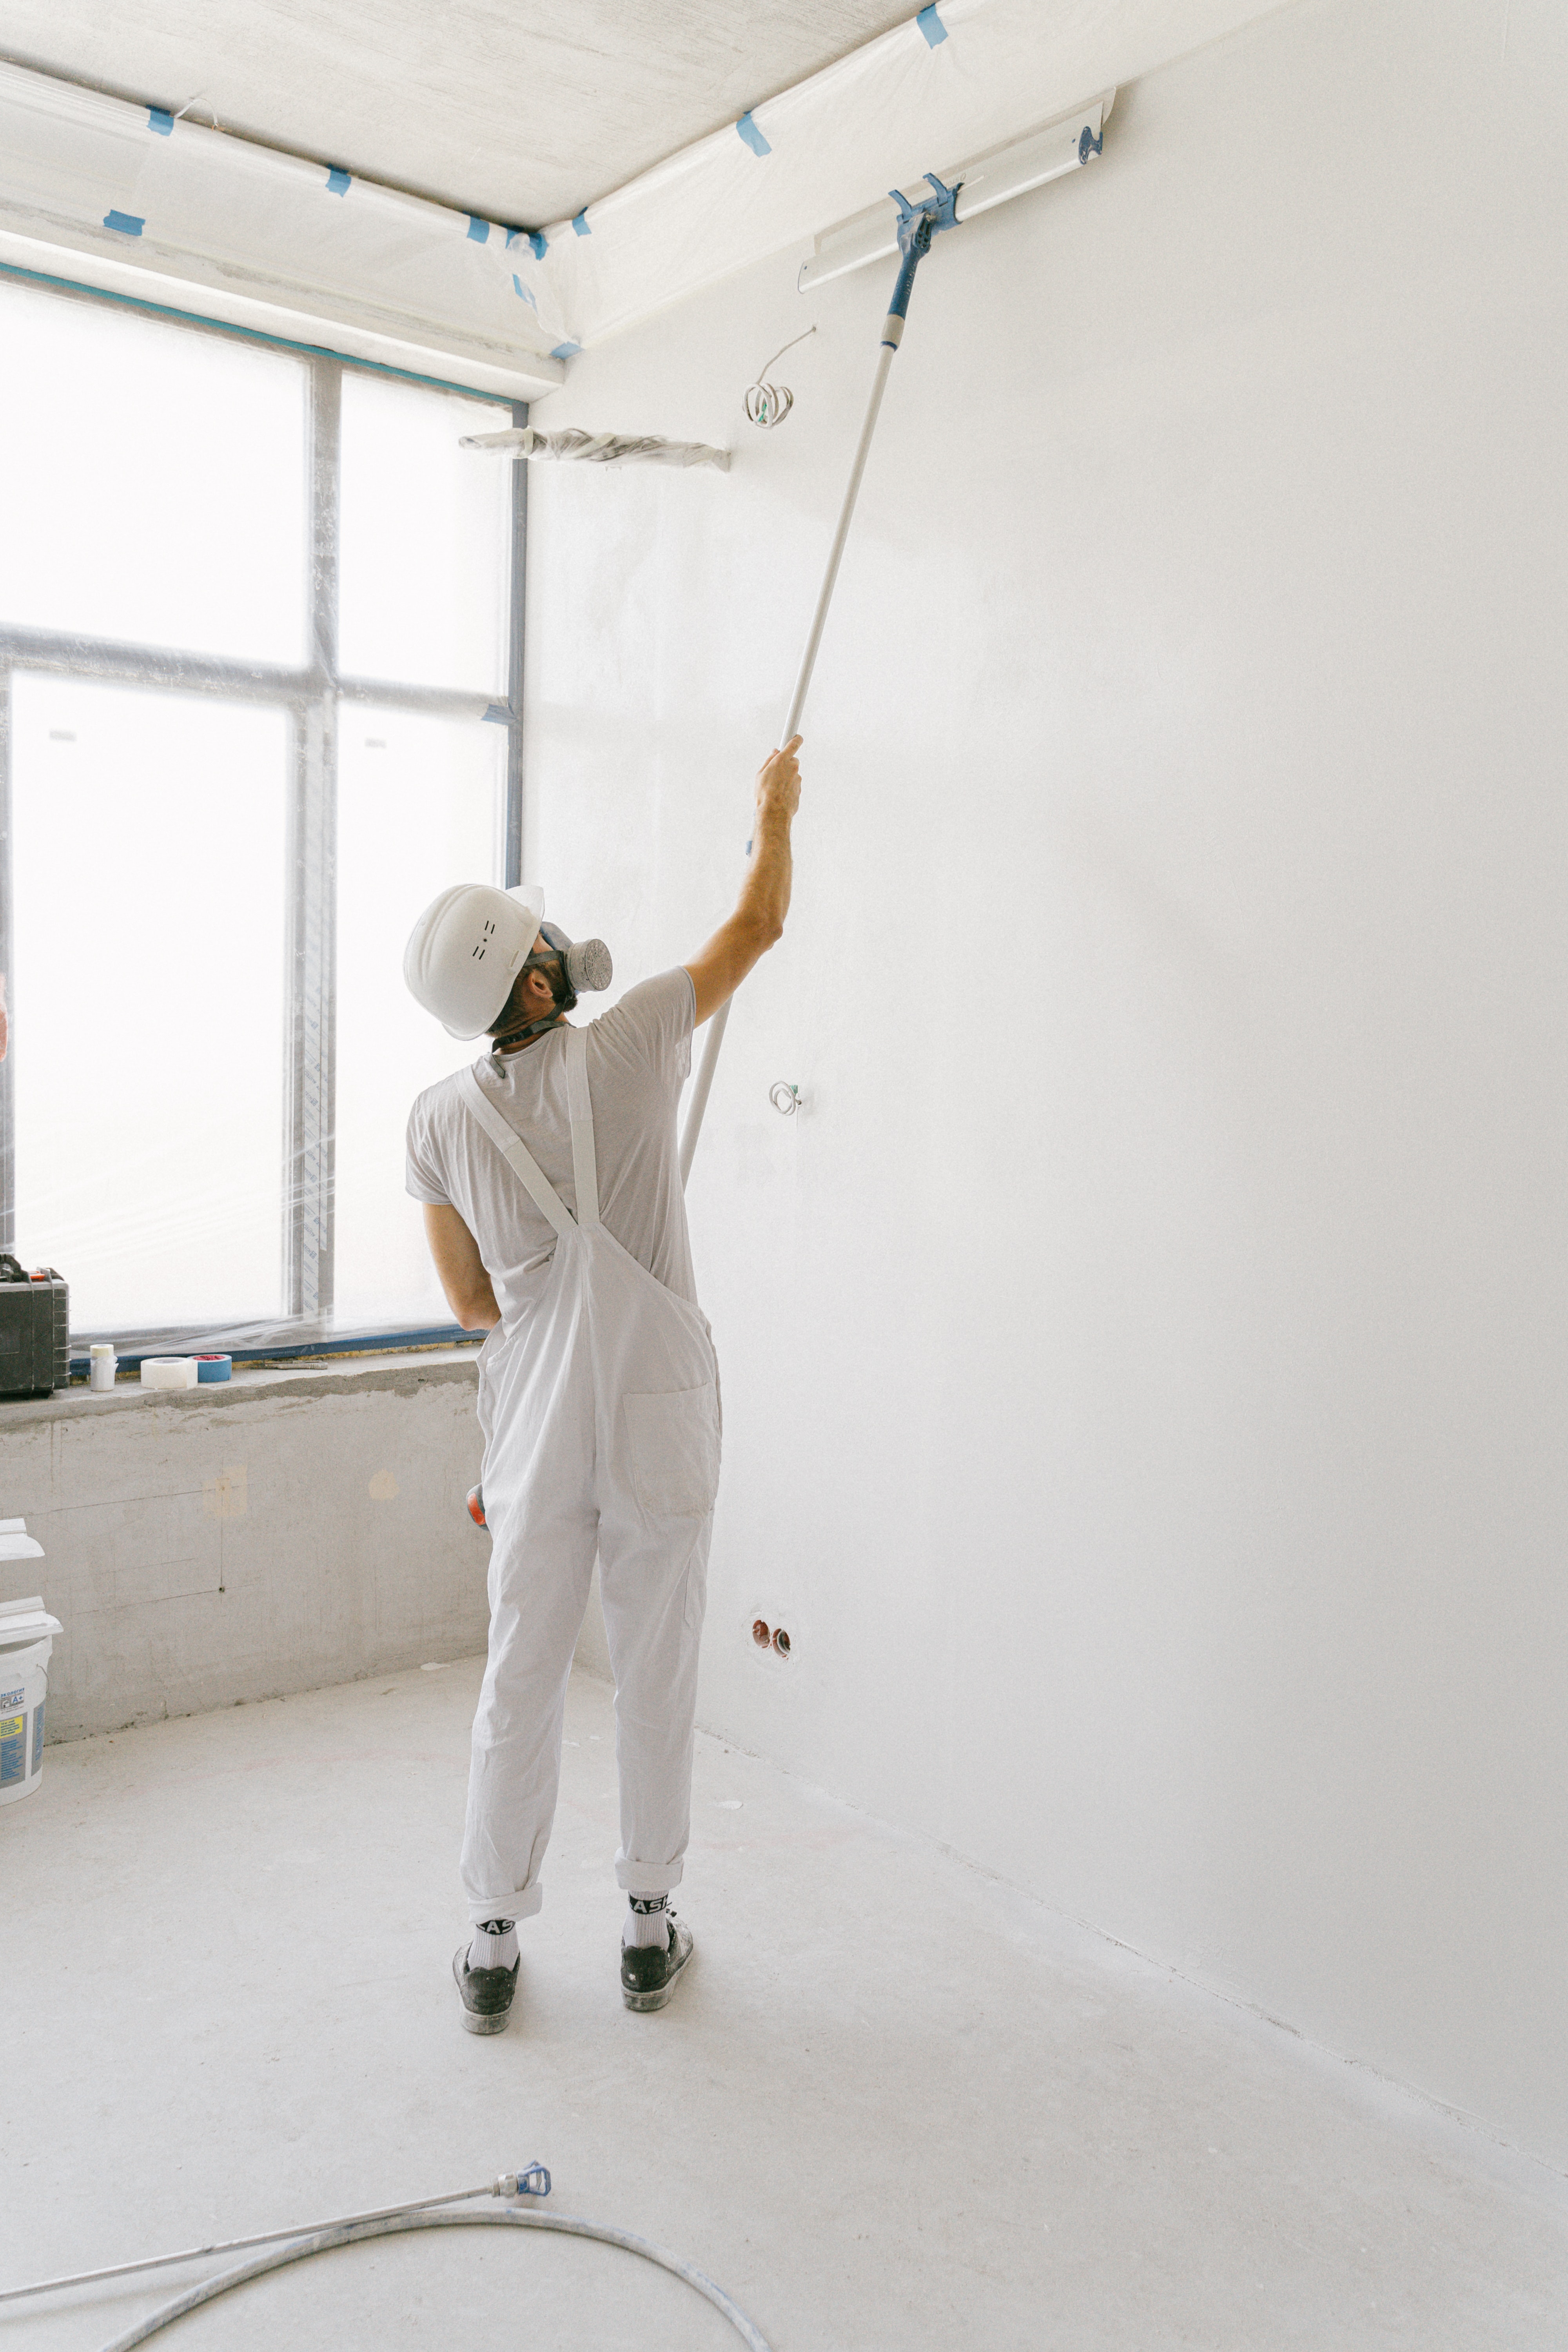 TIPS ON FINDING COMMERCIAL EXTERIOR PAINTING SERVICES IN IRELAND